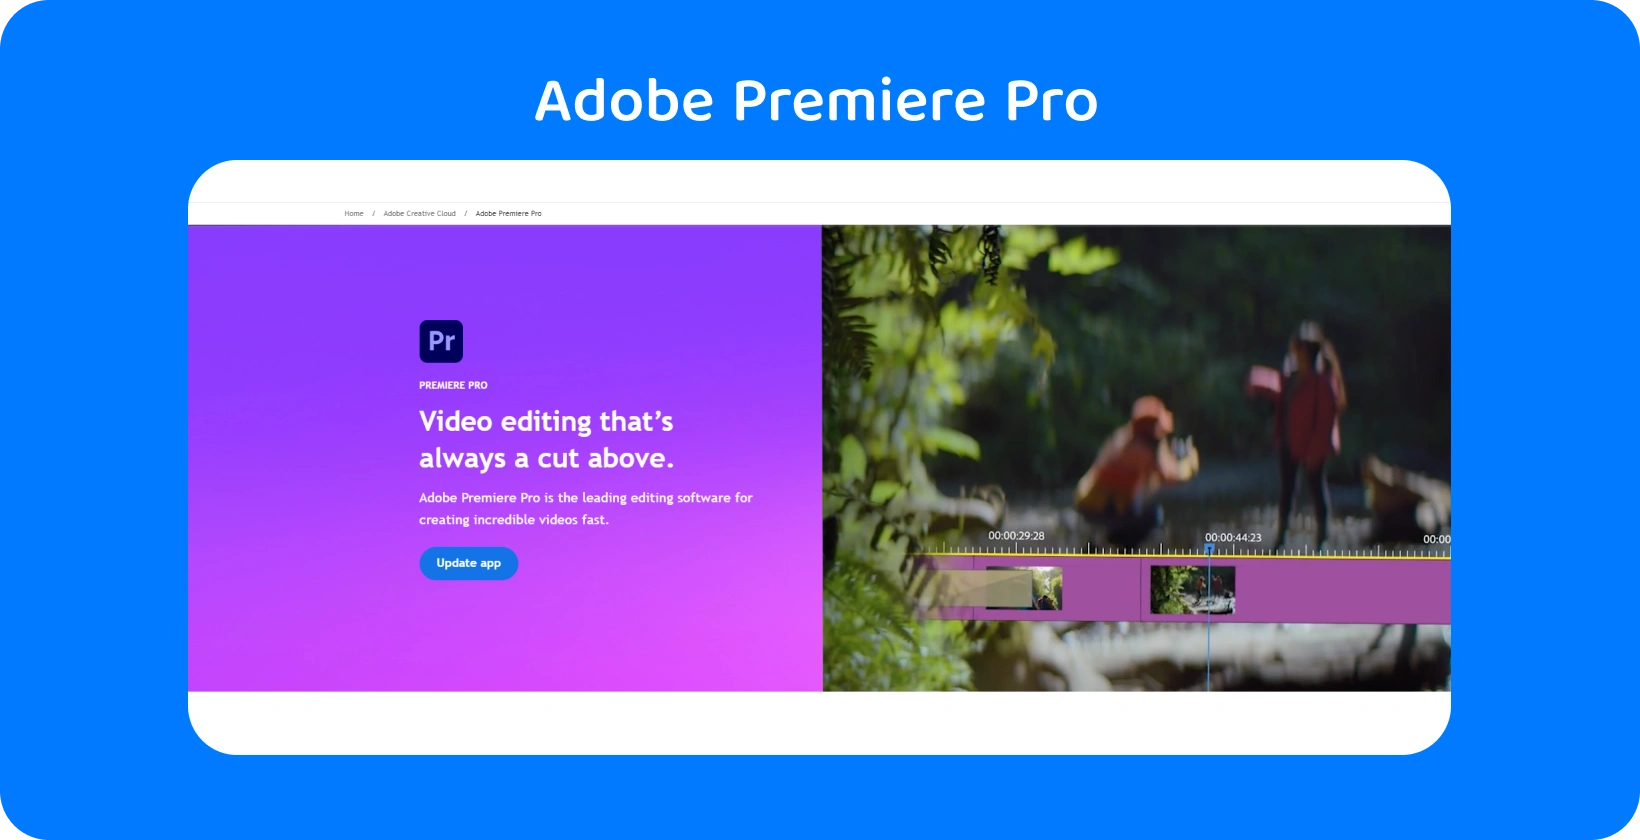 Adobe Premiere Pro interface displaying its advanced video editing capabilities, ideal for fast, precise edits.